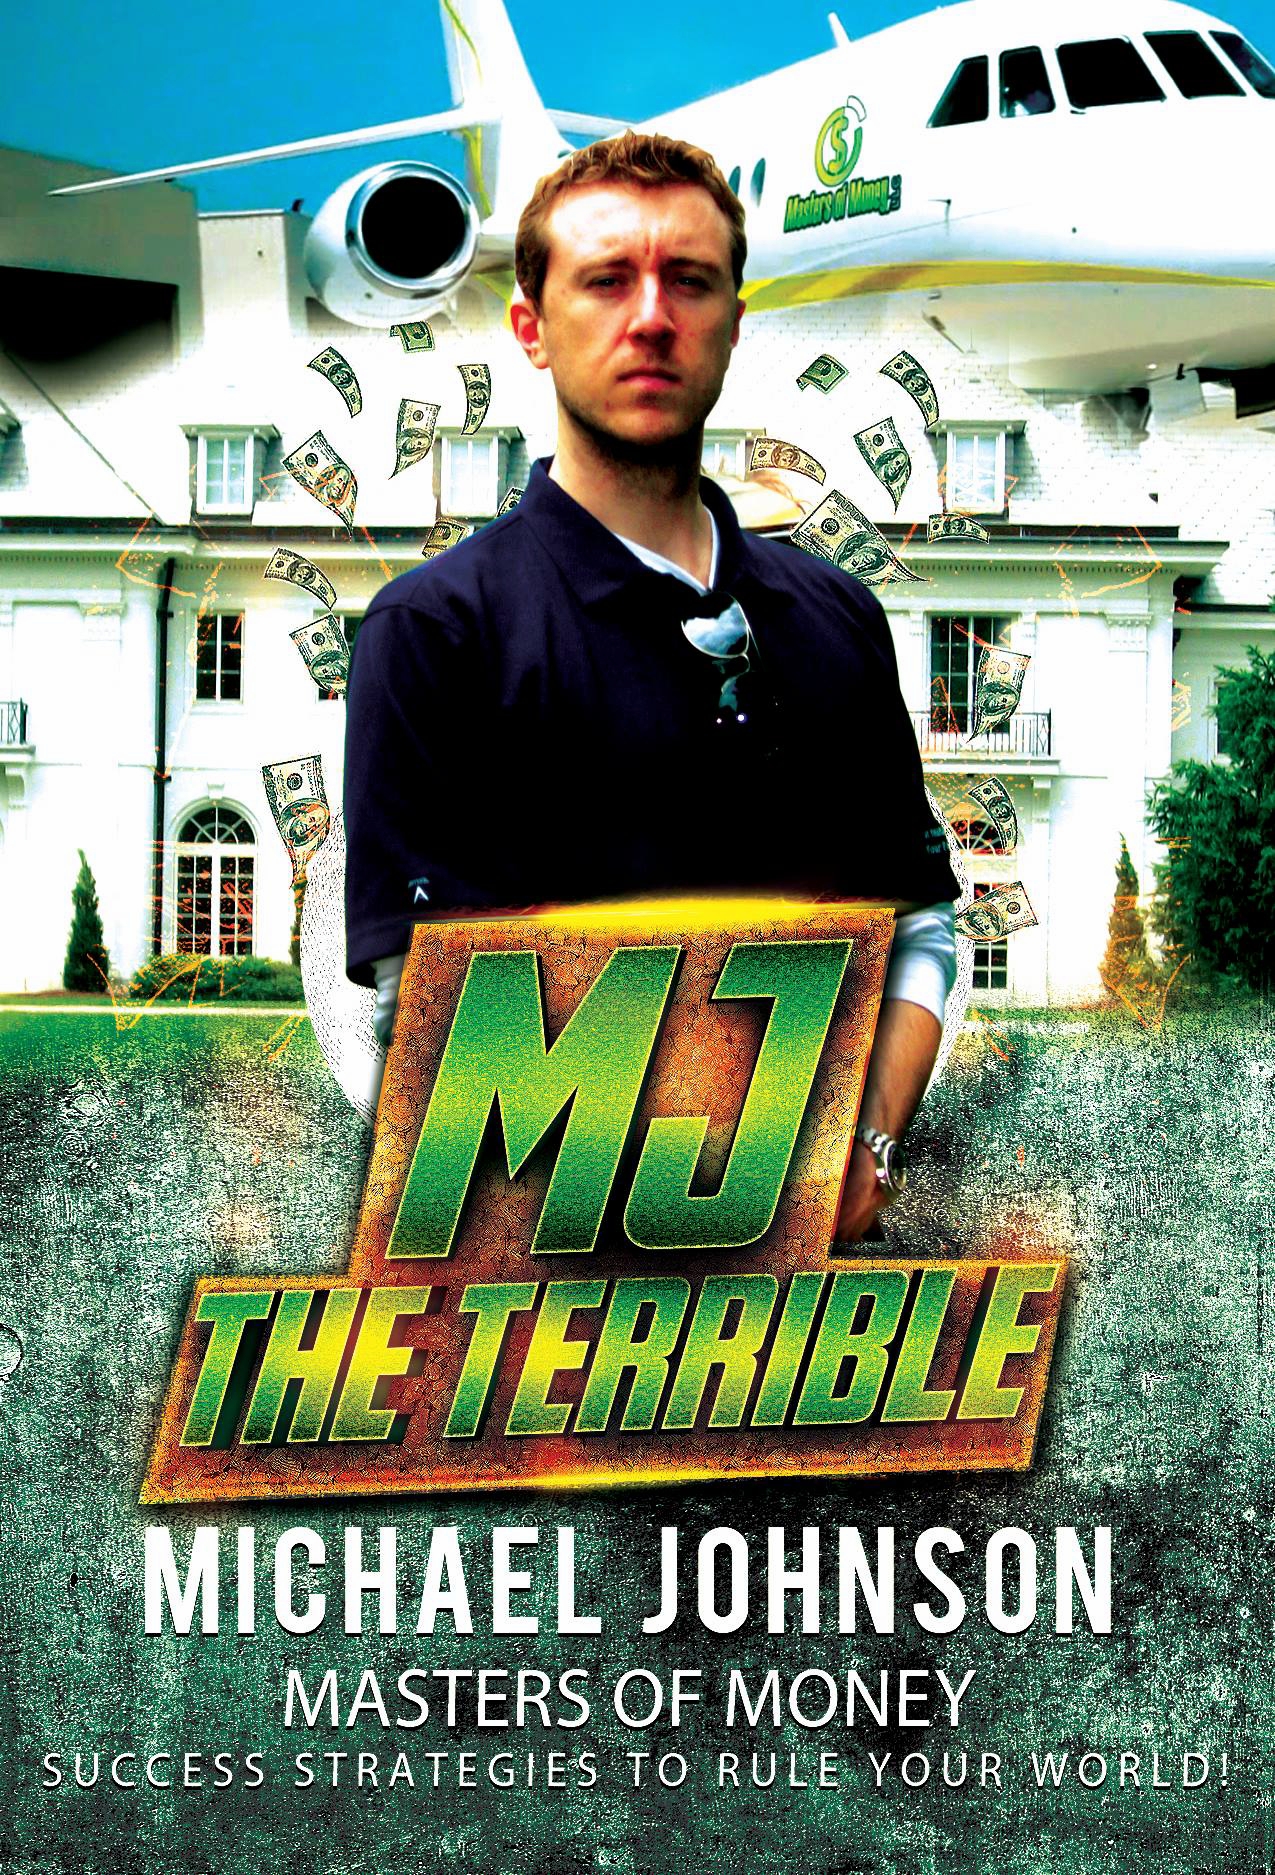 Michael "MJ The Terrible" Johnson Masters of Money LLC Layered Poster Graphic